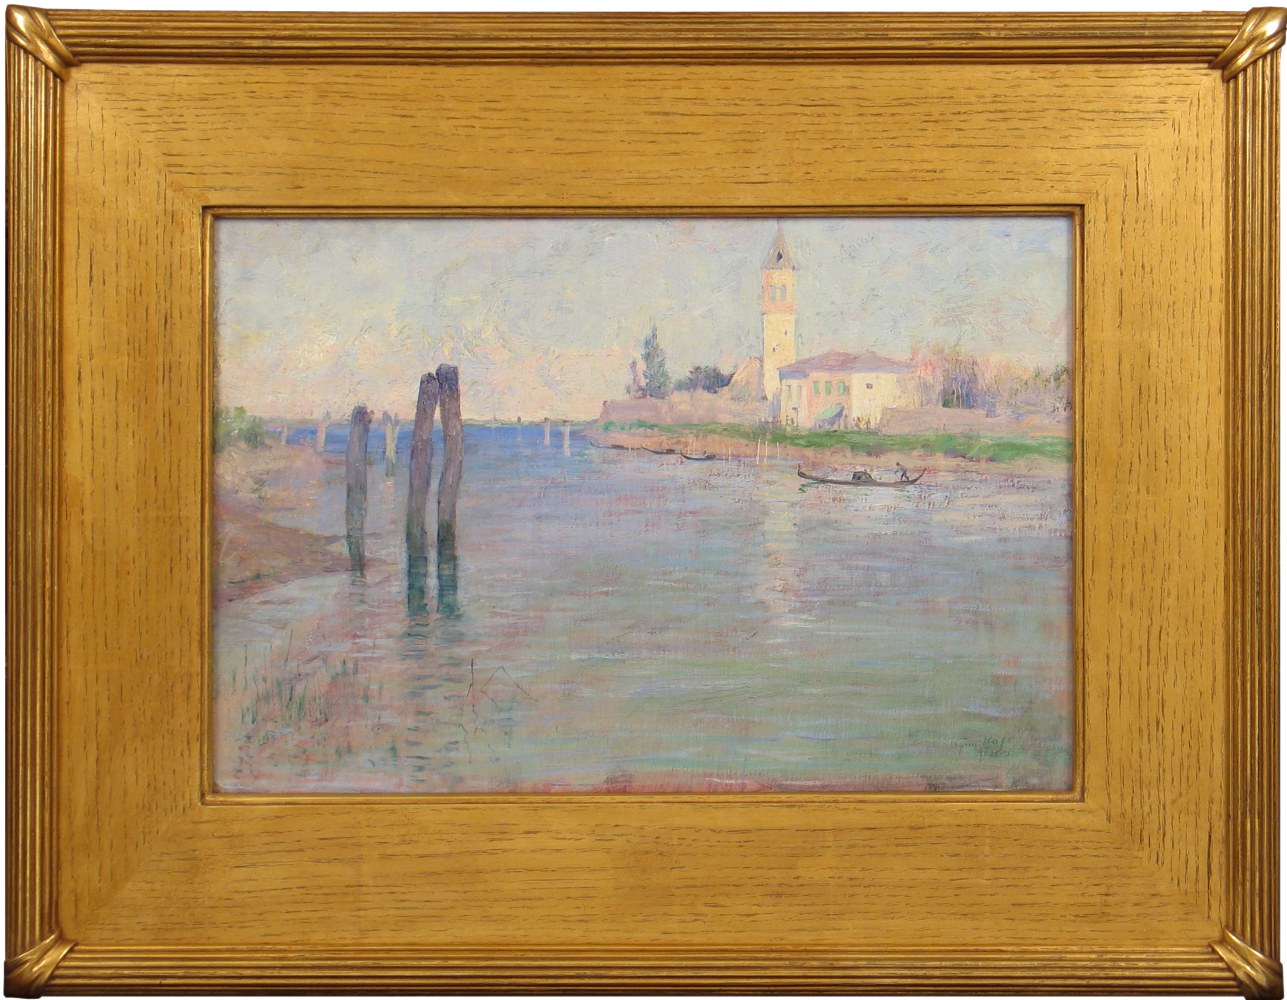 Guy Rose (1867–1925), The Gondolier, Venice, oil on canvas, 12 1/2 x 18 in., signed lower right: Guy Rose (framed)